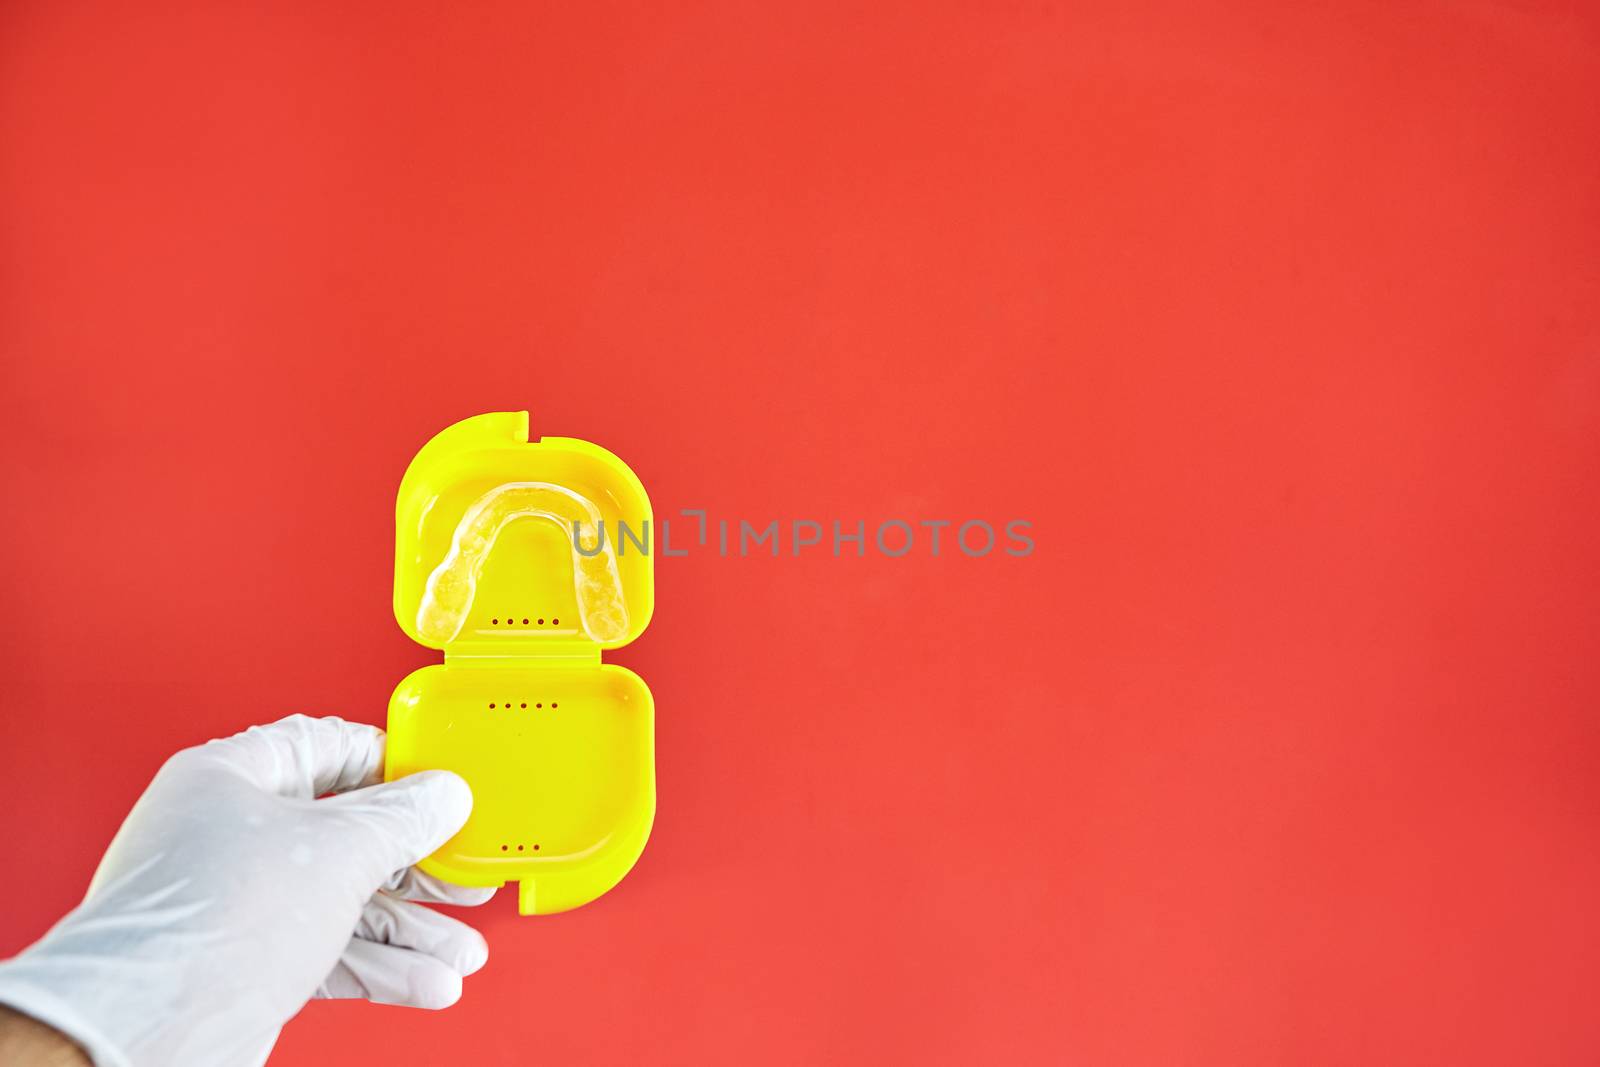 Invisible bracelets in a yellow case on a red background held in one hand by a latex glove